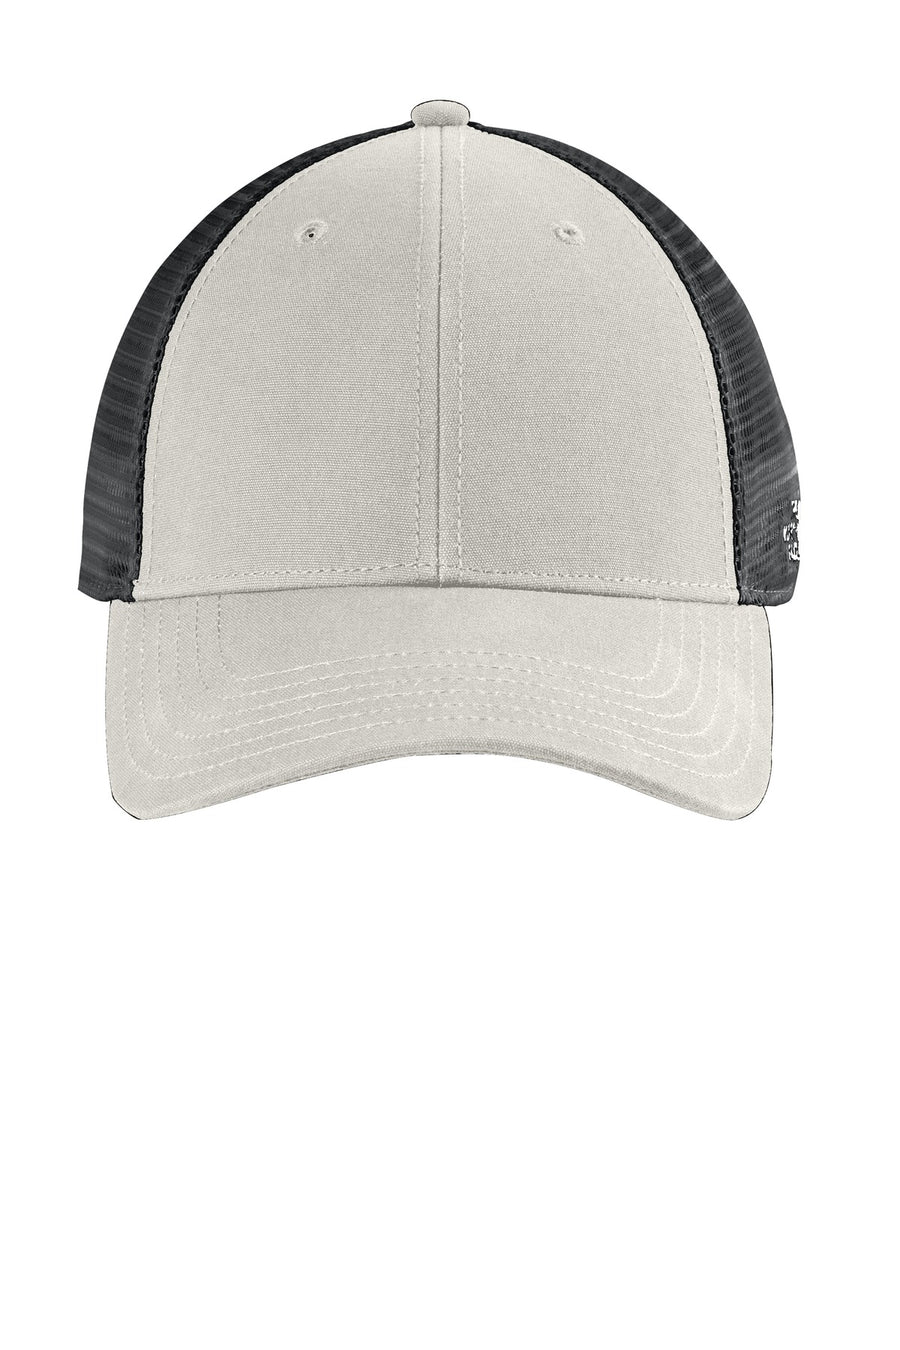 The North Face Ultimate Trucker Cap.